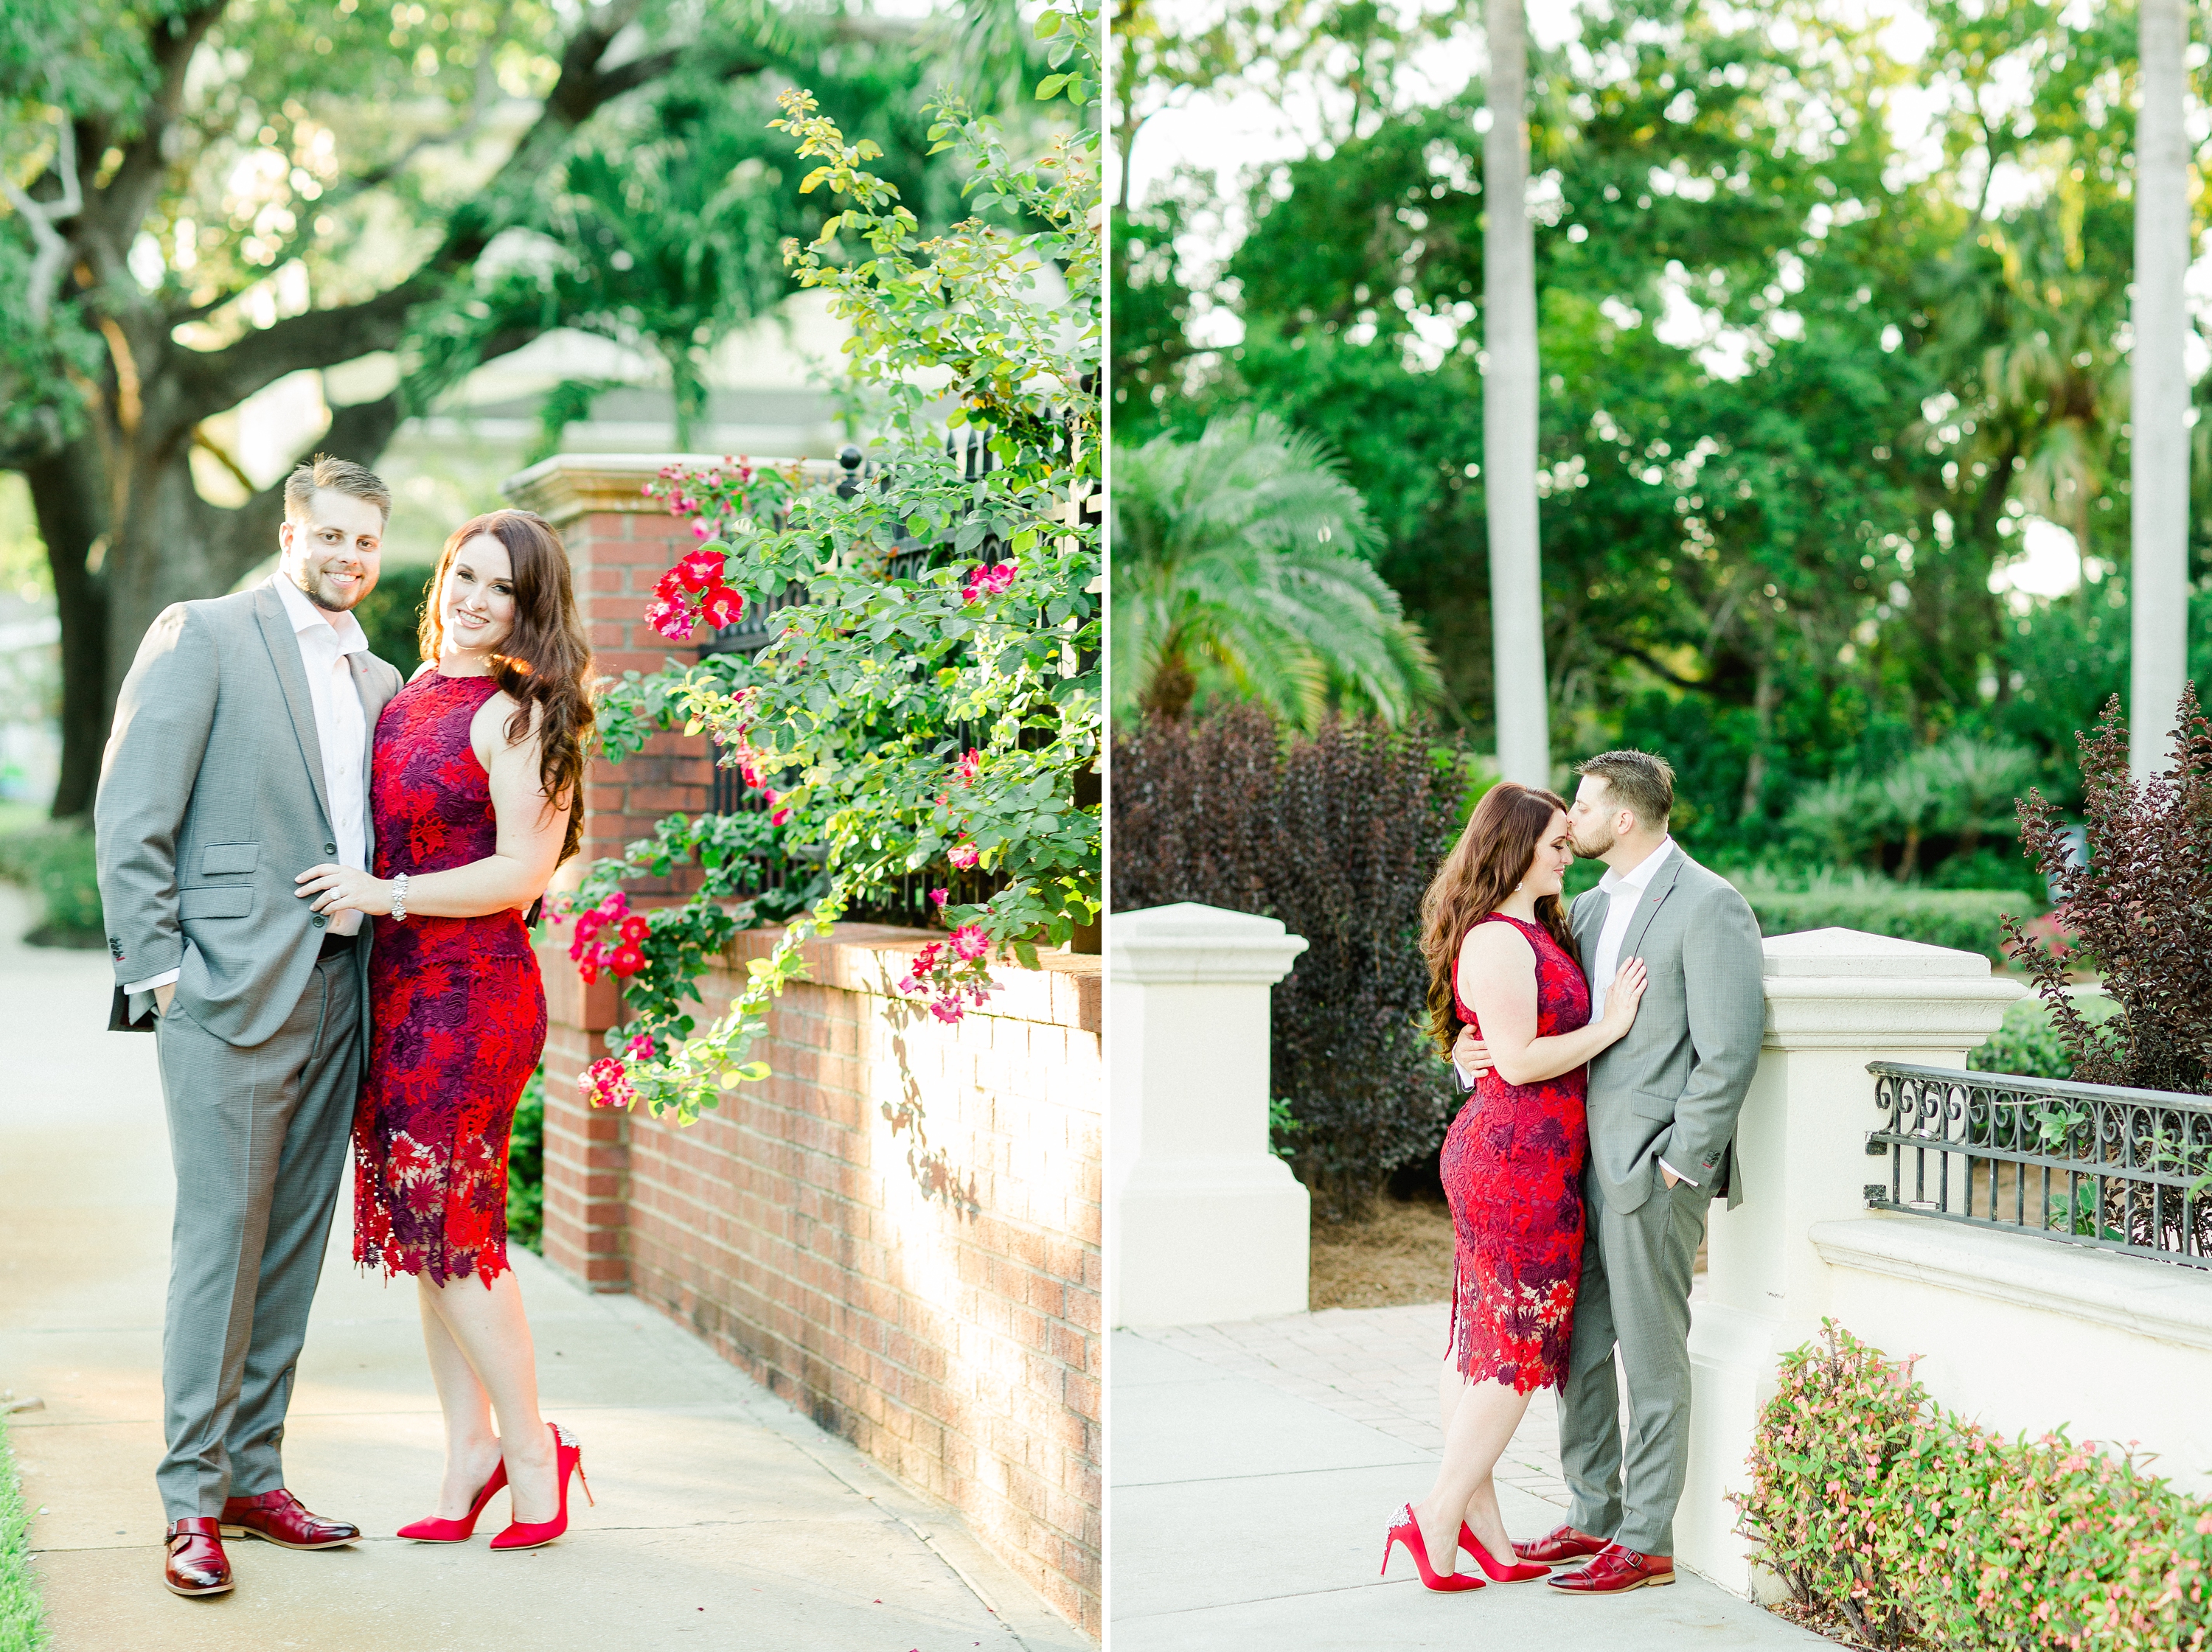 South Tampa Engagement | © Ailyn La Torre Photography 2019